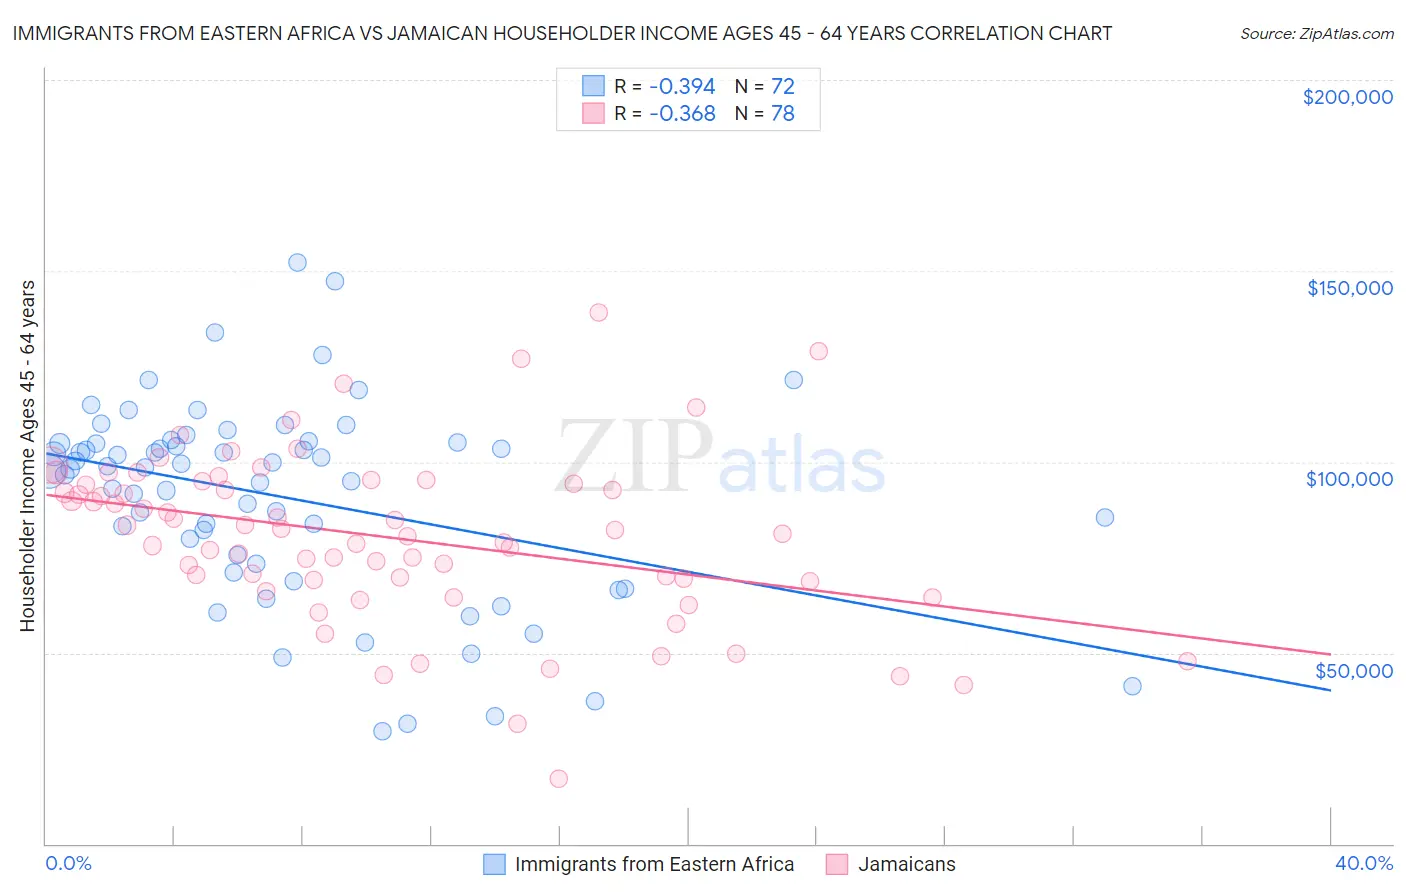 Immigrants from Eastern Africa vs Jamaican Householder Income Ages 45 - 64 years